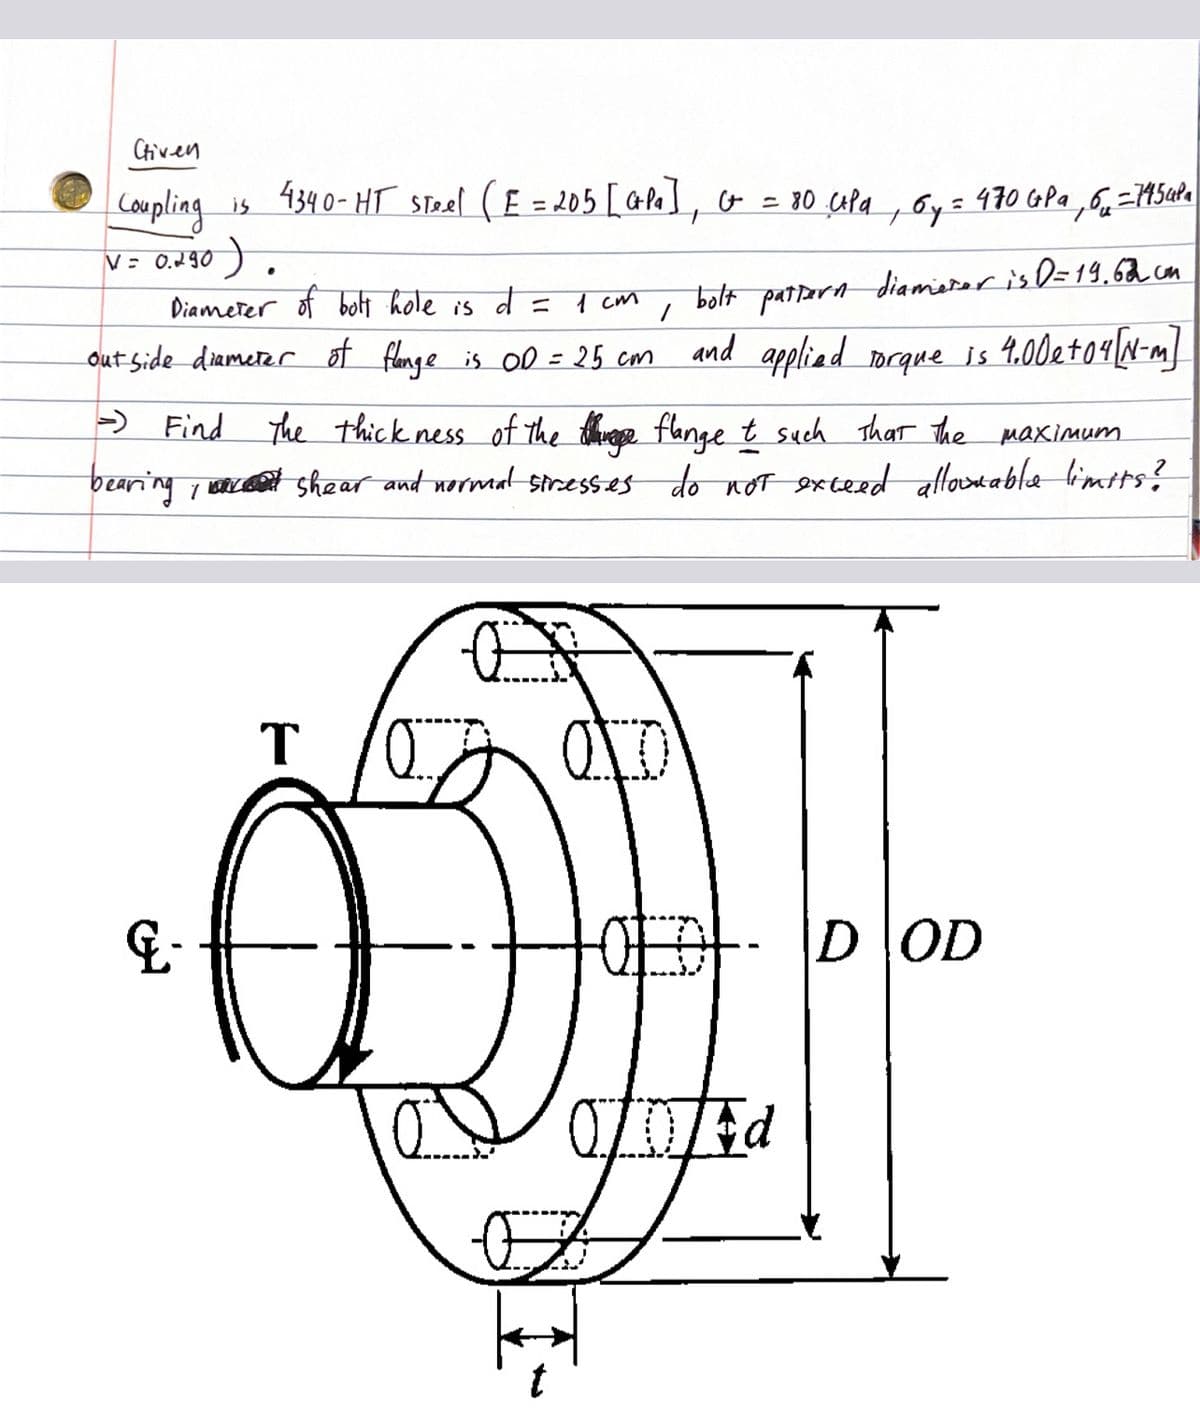 Chiven
Coupling is 4340-HT Steel (E = 205 [GP₁], G = 80 Upa, Gy:
V = 0.290).
Diameter of bolt hole is
1 см
1
out side diameter of flange is OD = 25 cm
bolt pattern diameter is D=19.62 cm
and applied torque is 4.00 e +04 [N-m]
&-
d =
- Find The thickness of the thing flange t such that the maximum
bearing, shear and normal stresses do not exceed allowable limits?
T
O
= 470 GPa 6-7454Pa
OF DOD
OD Ed